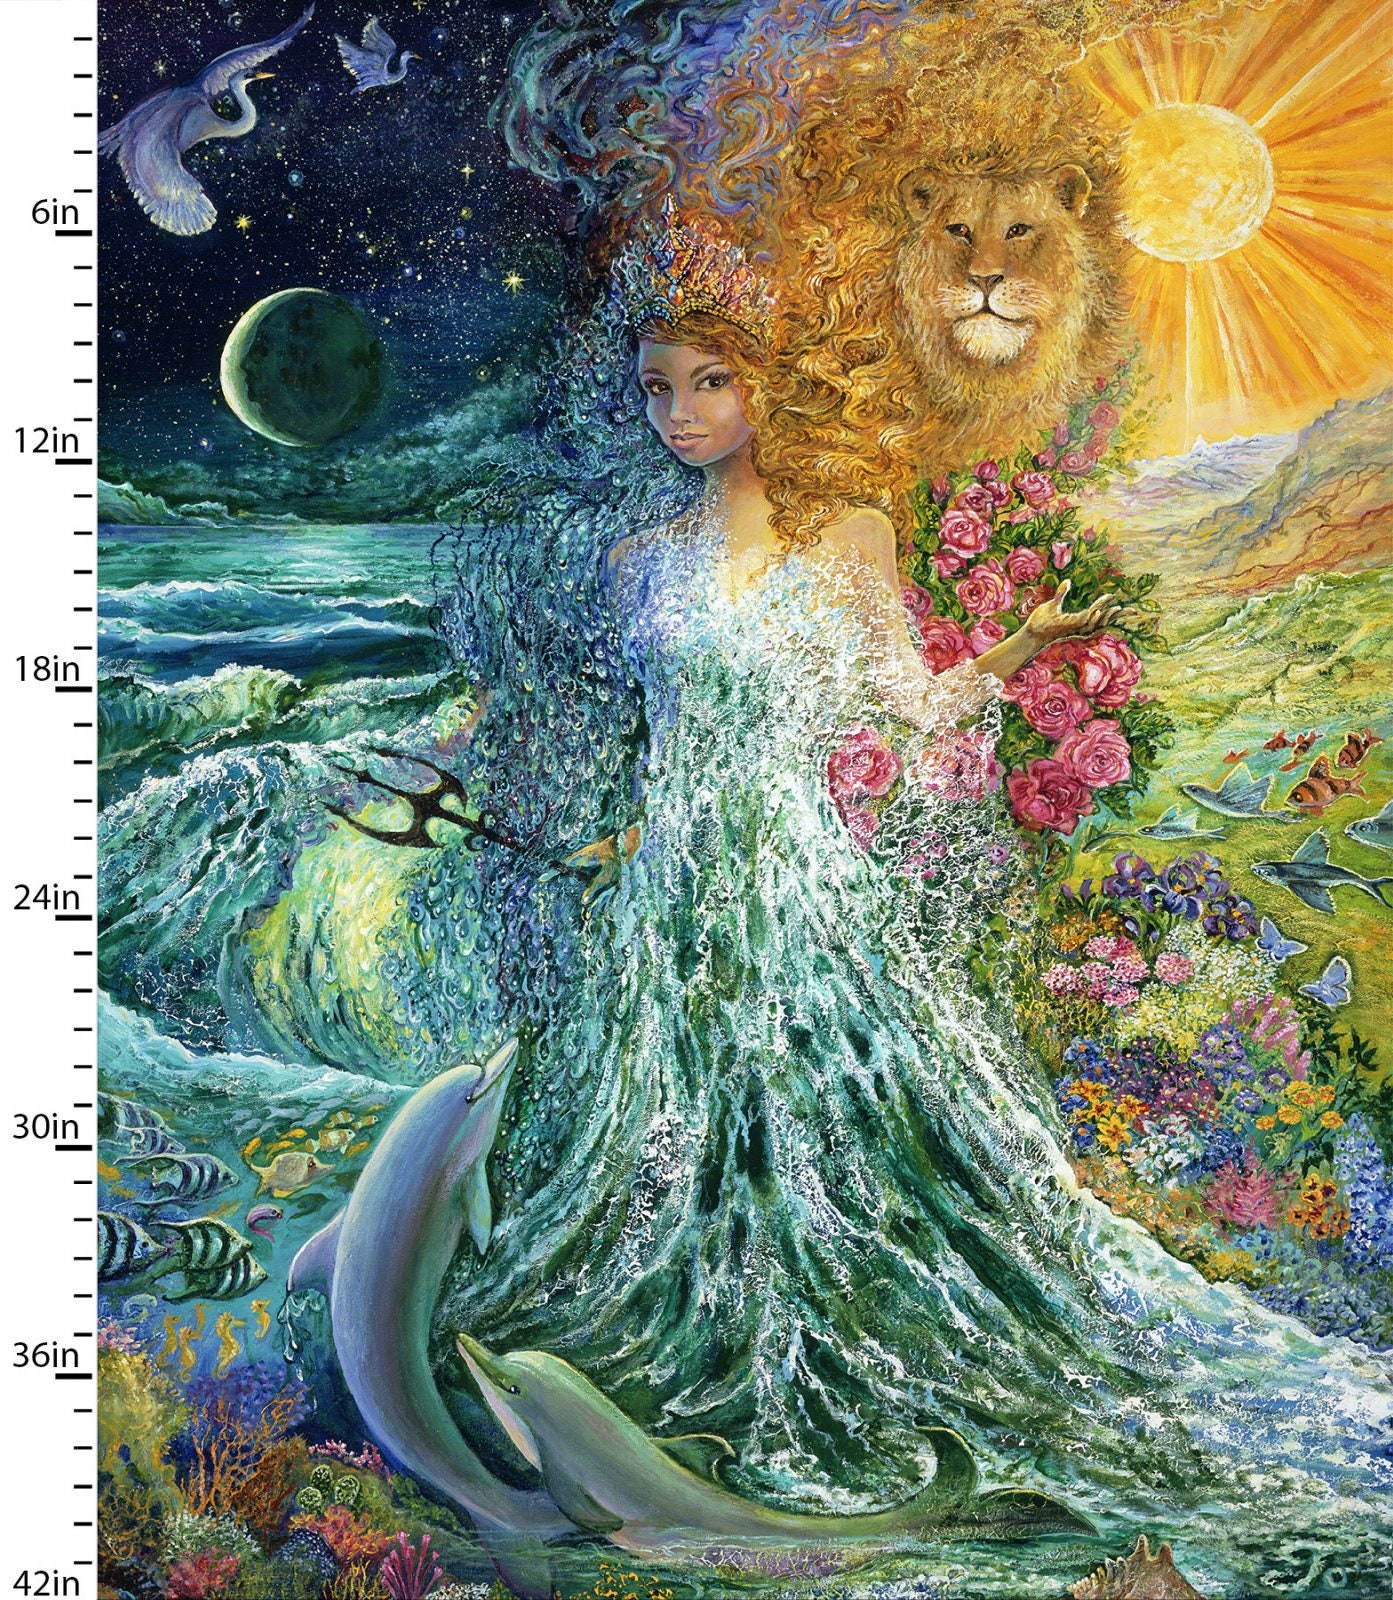 World Of Wonder Lions by Josephine Wall Half Yard NEW 3 Wishes Fabric Whimsical Nature Digitally Printed Cotton Fabric